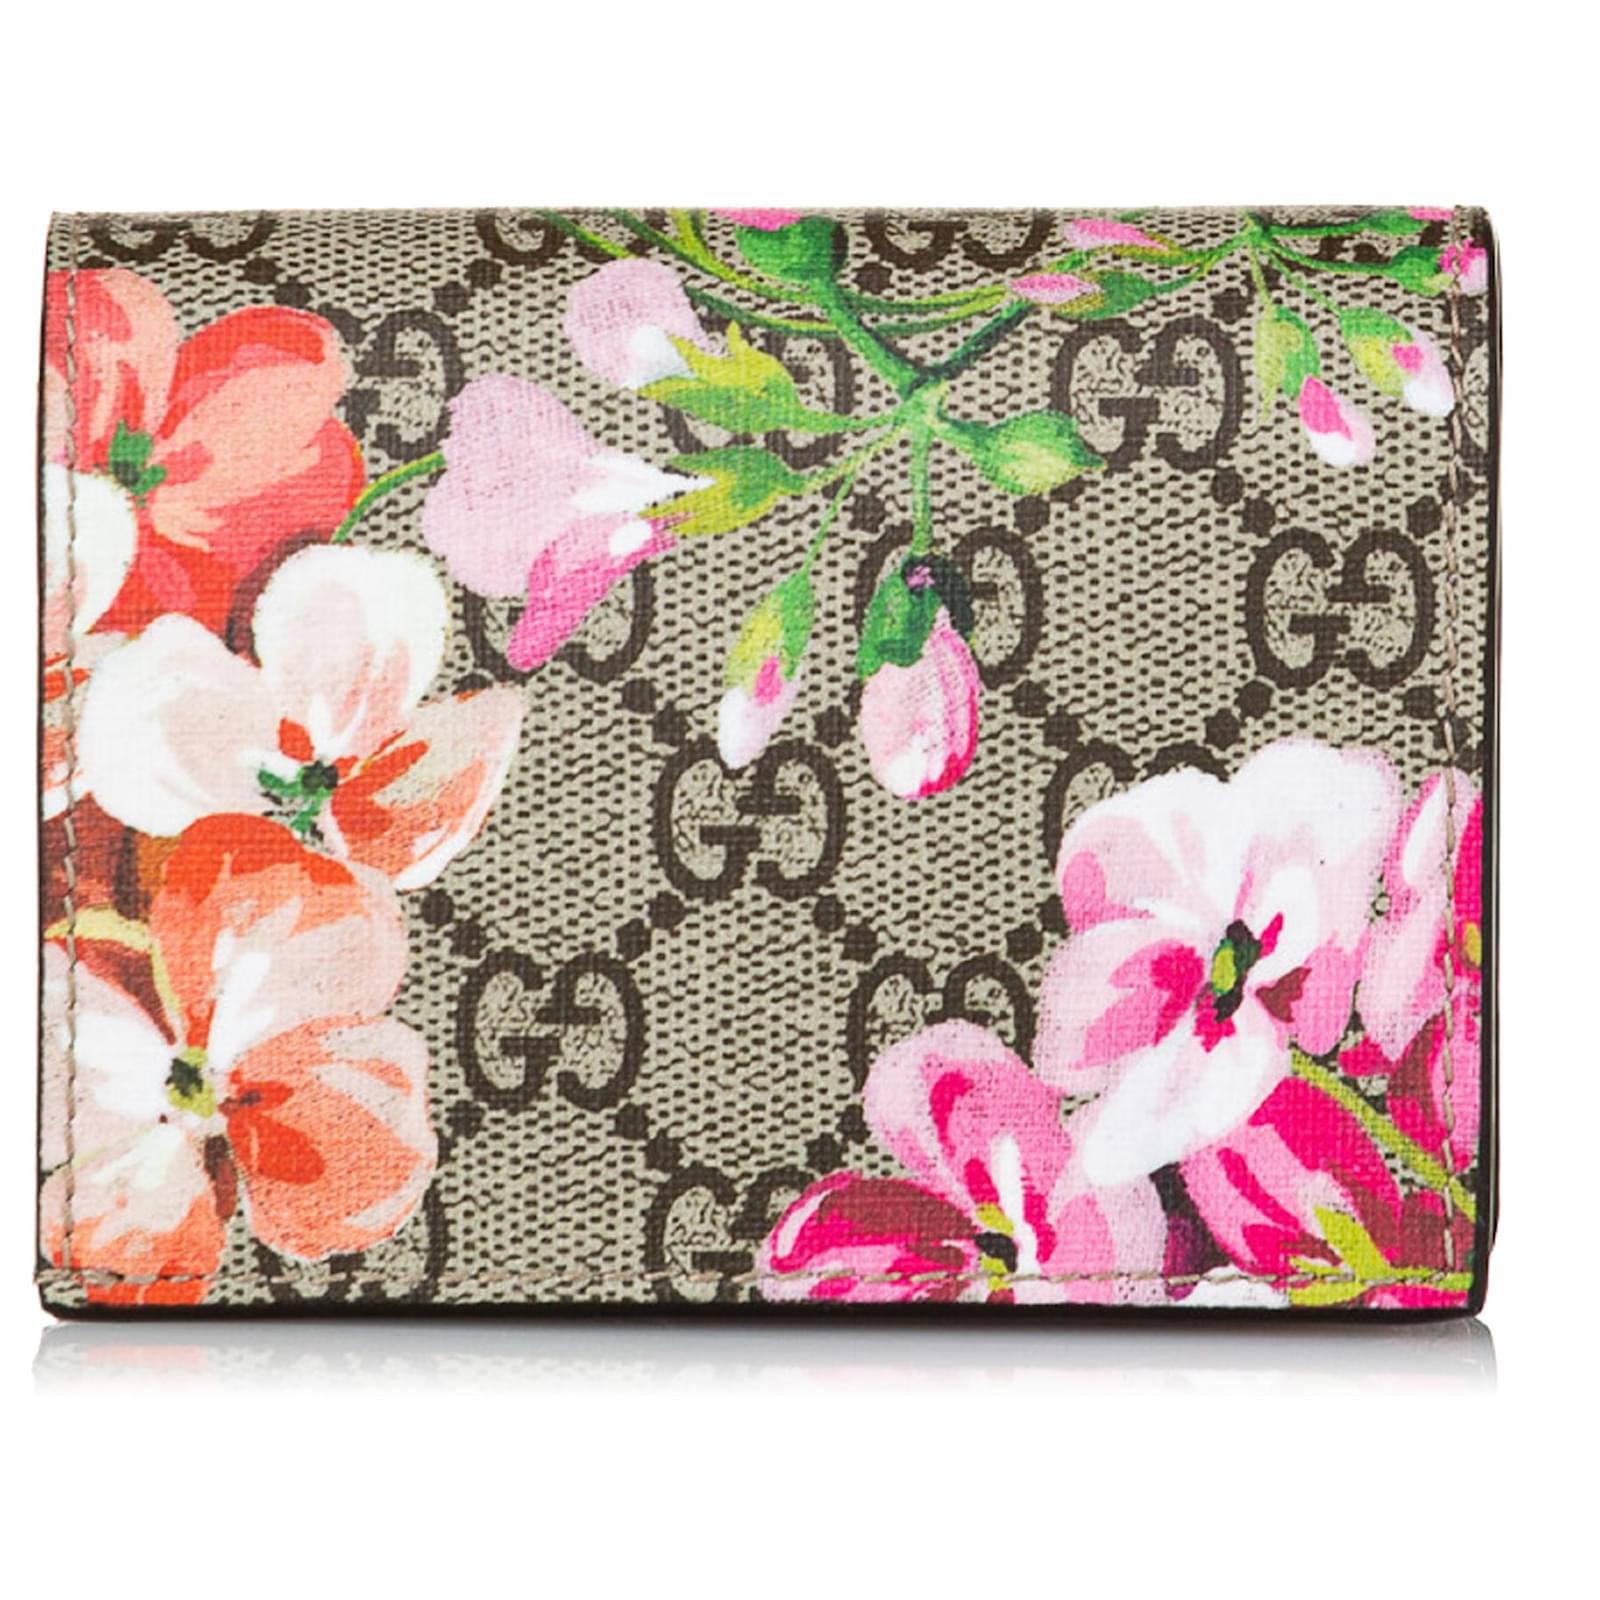 Gucci GG Blooms Key Pouch - Brown Wallets, Accessories - GUC166093